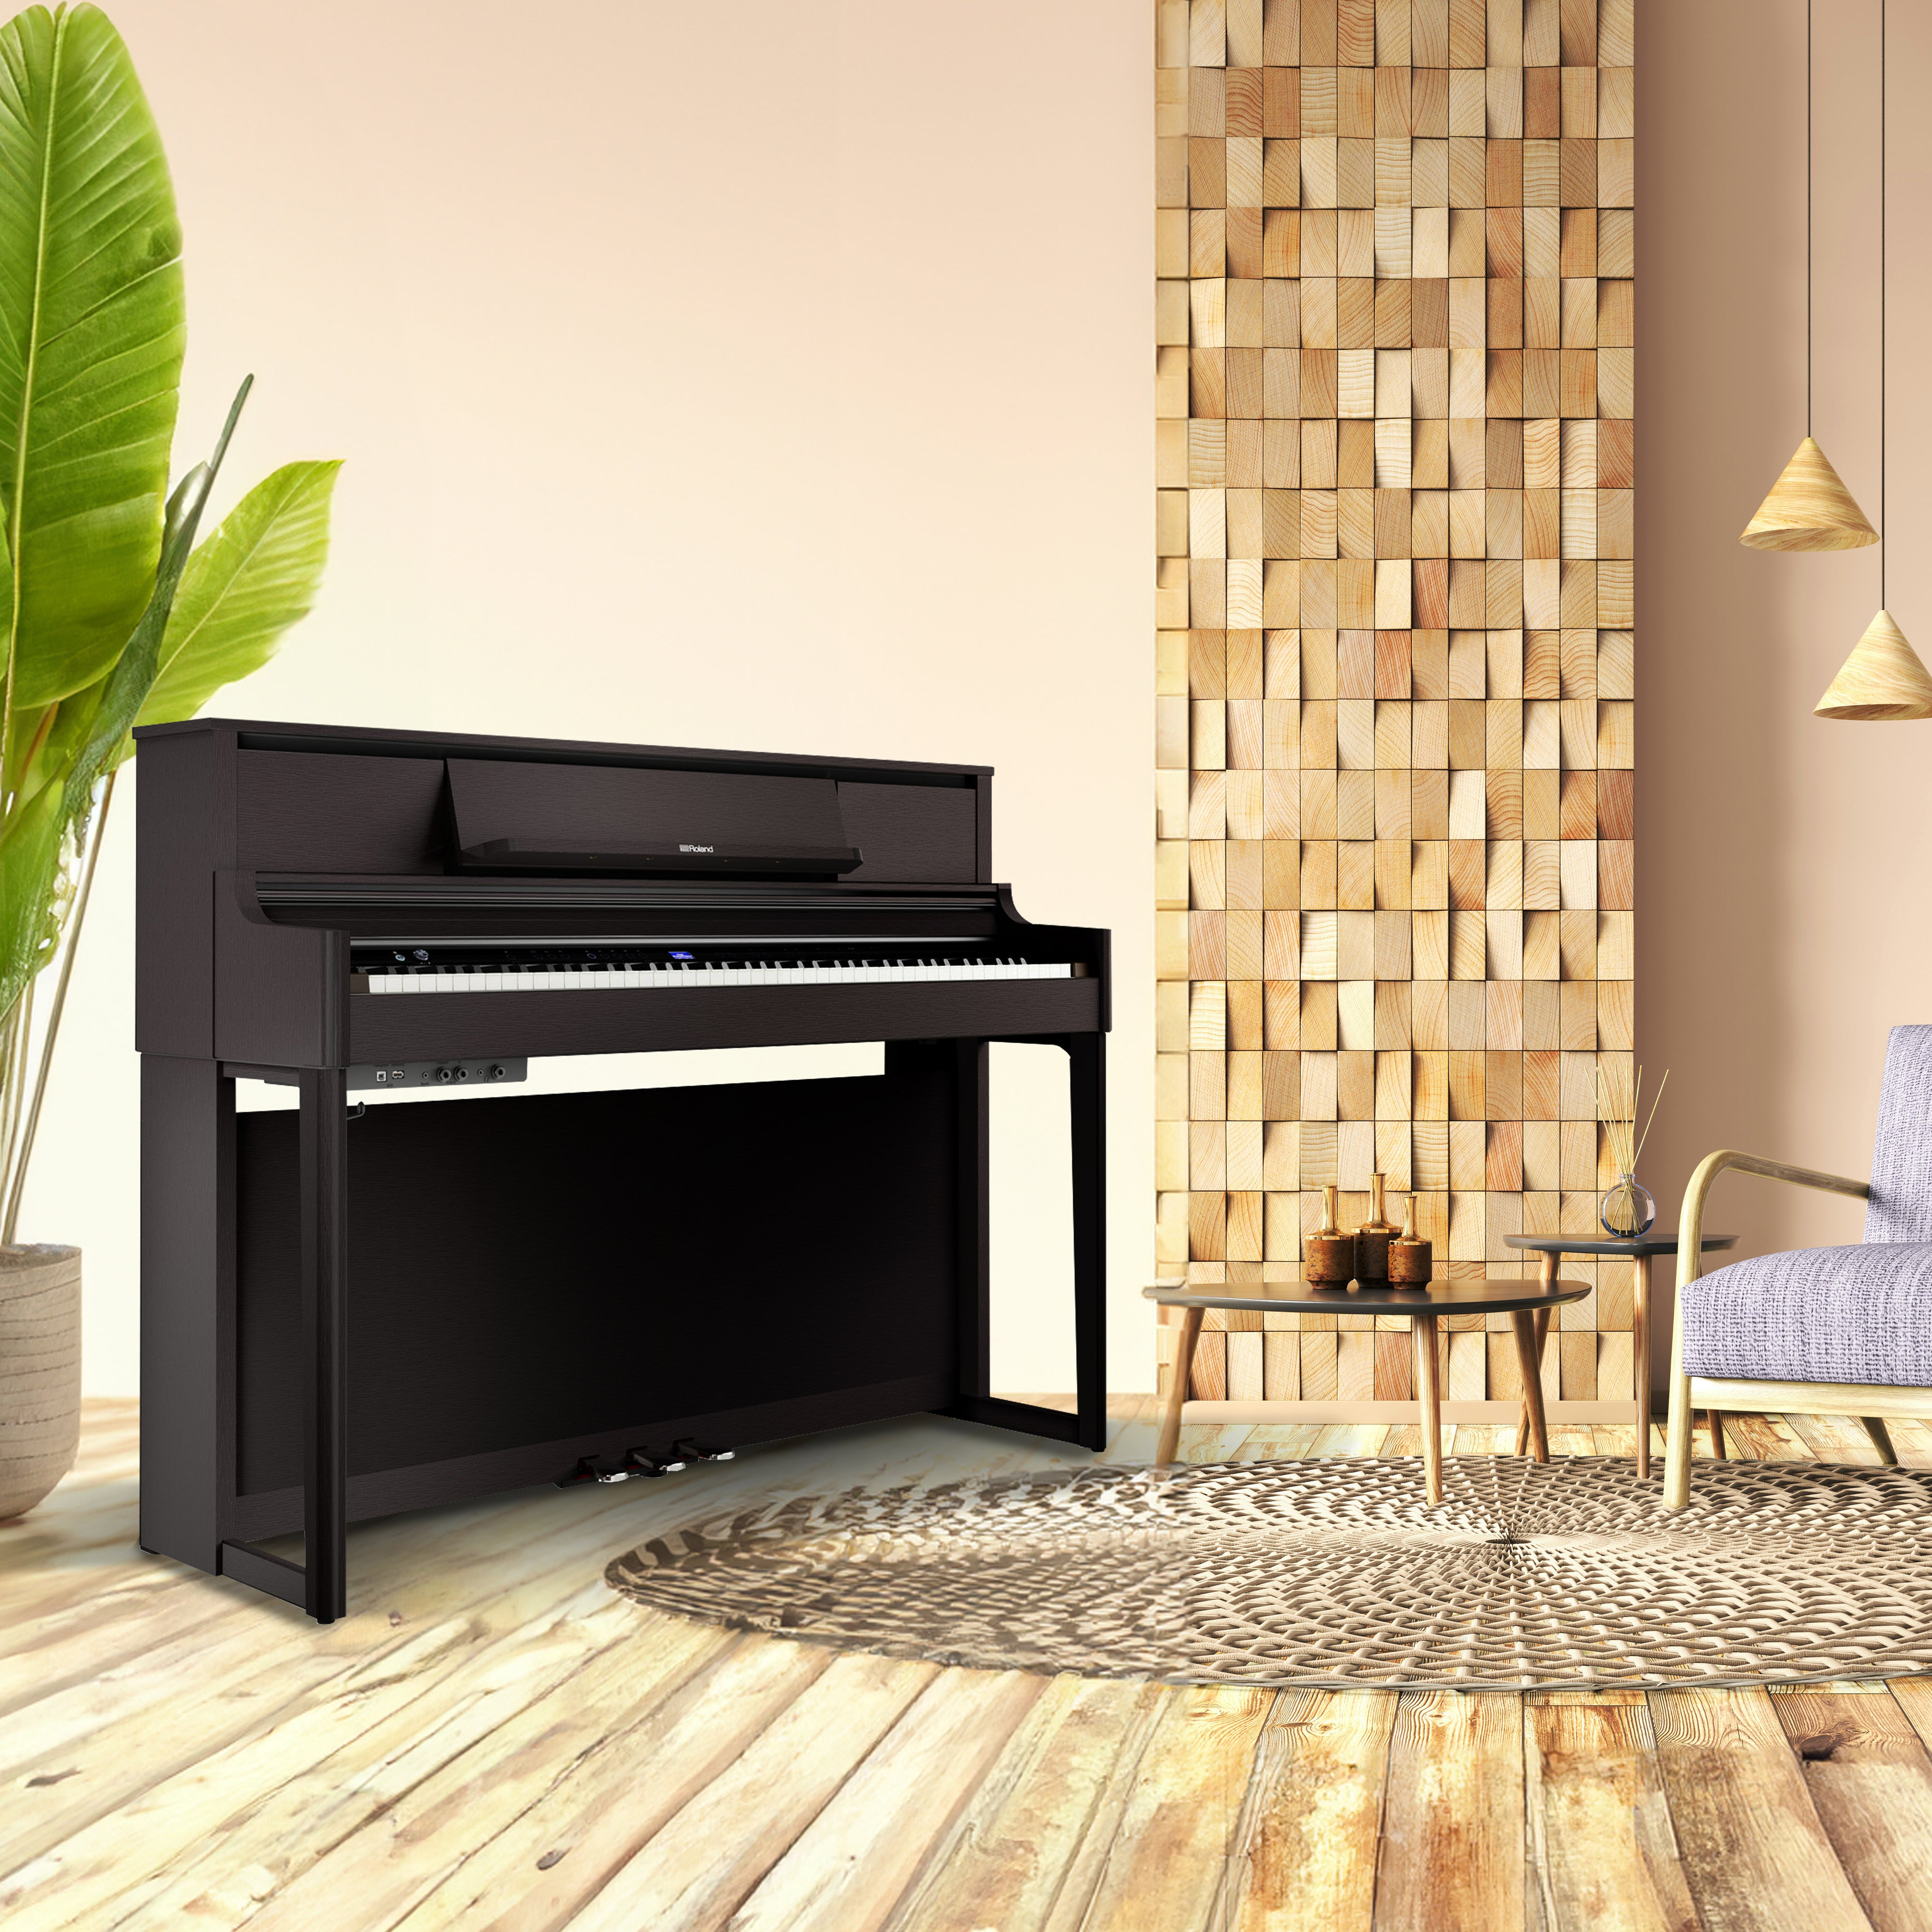 Roland LX-5 Digital Piano with Bench - Dark Rosewood - in a stylish living room